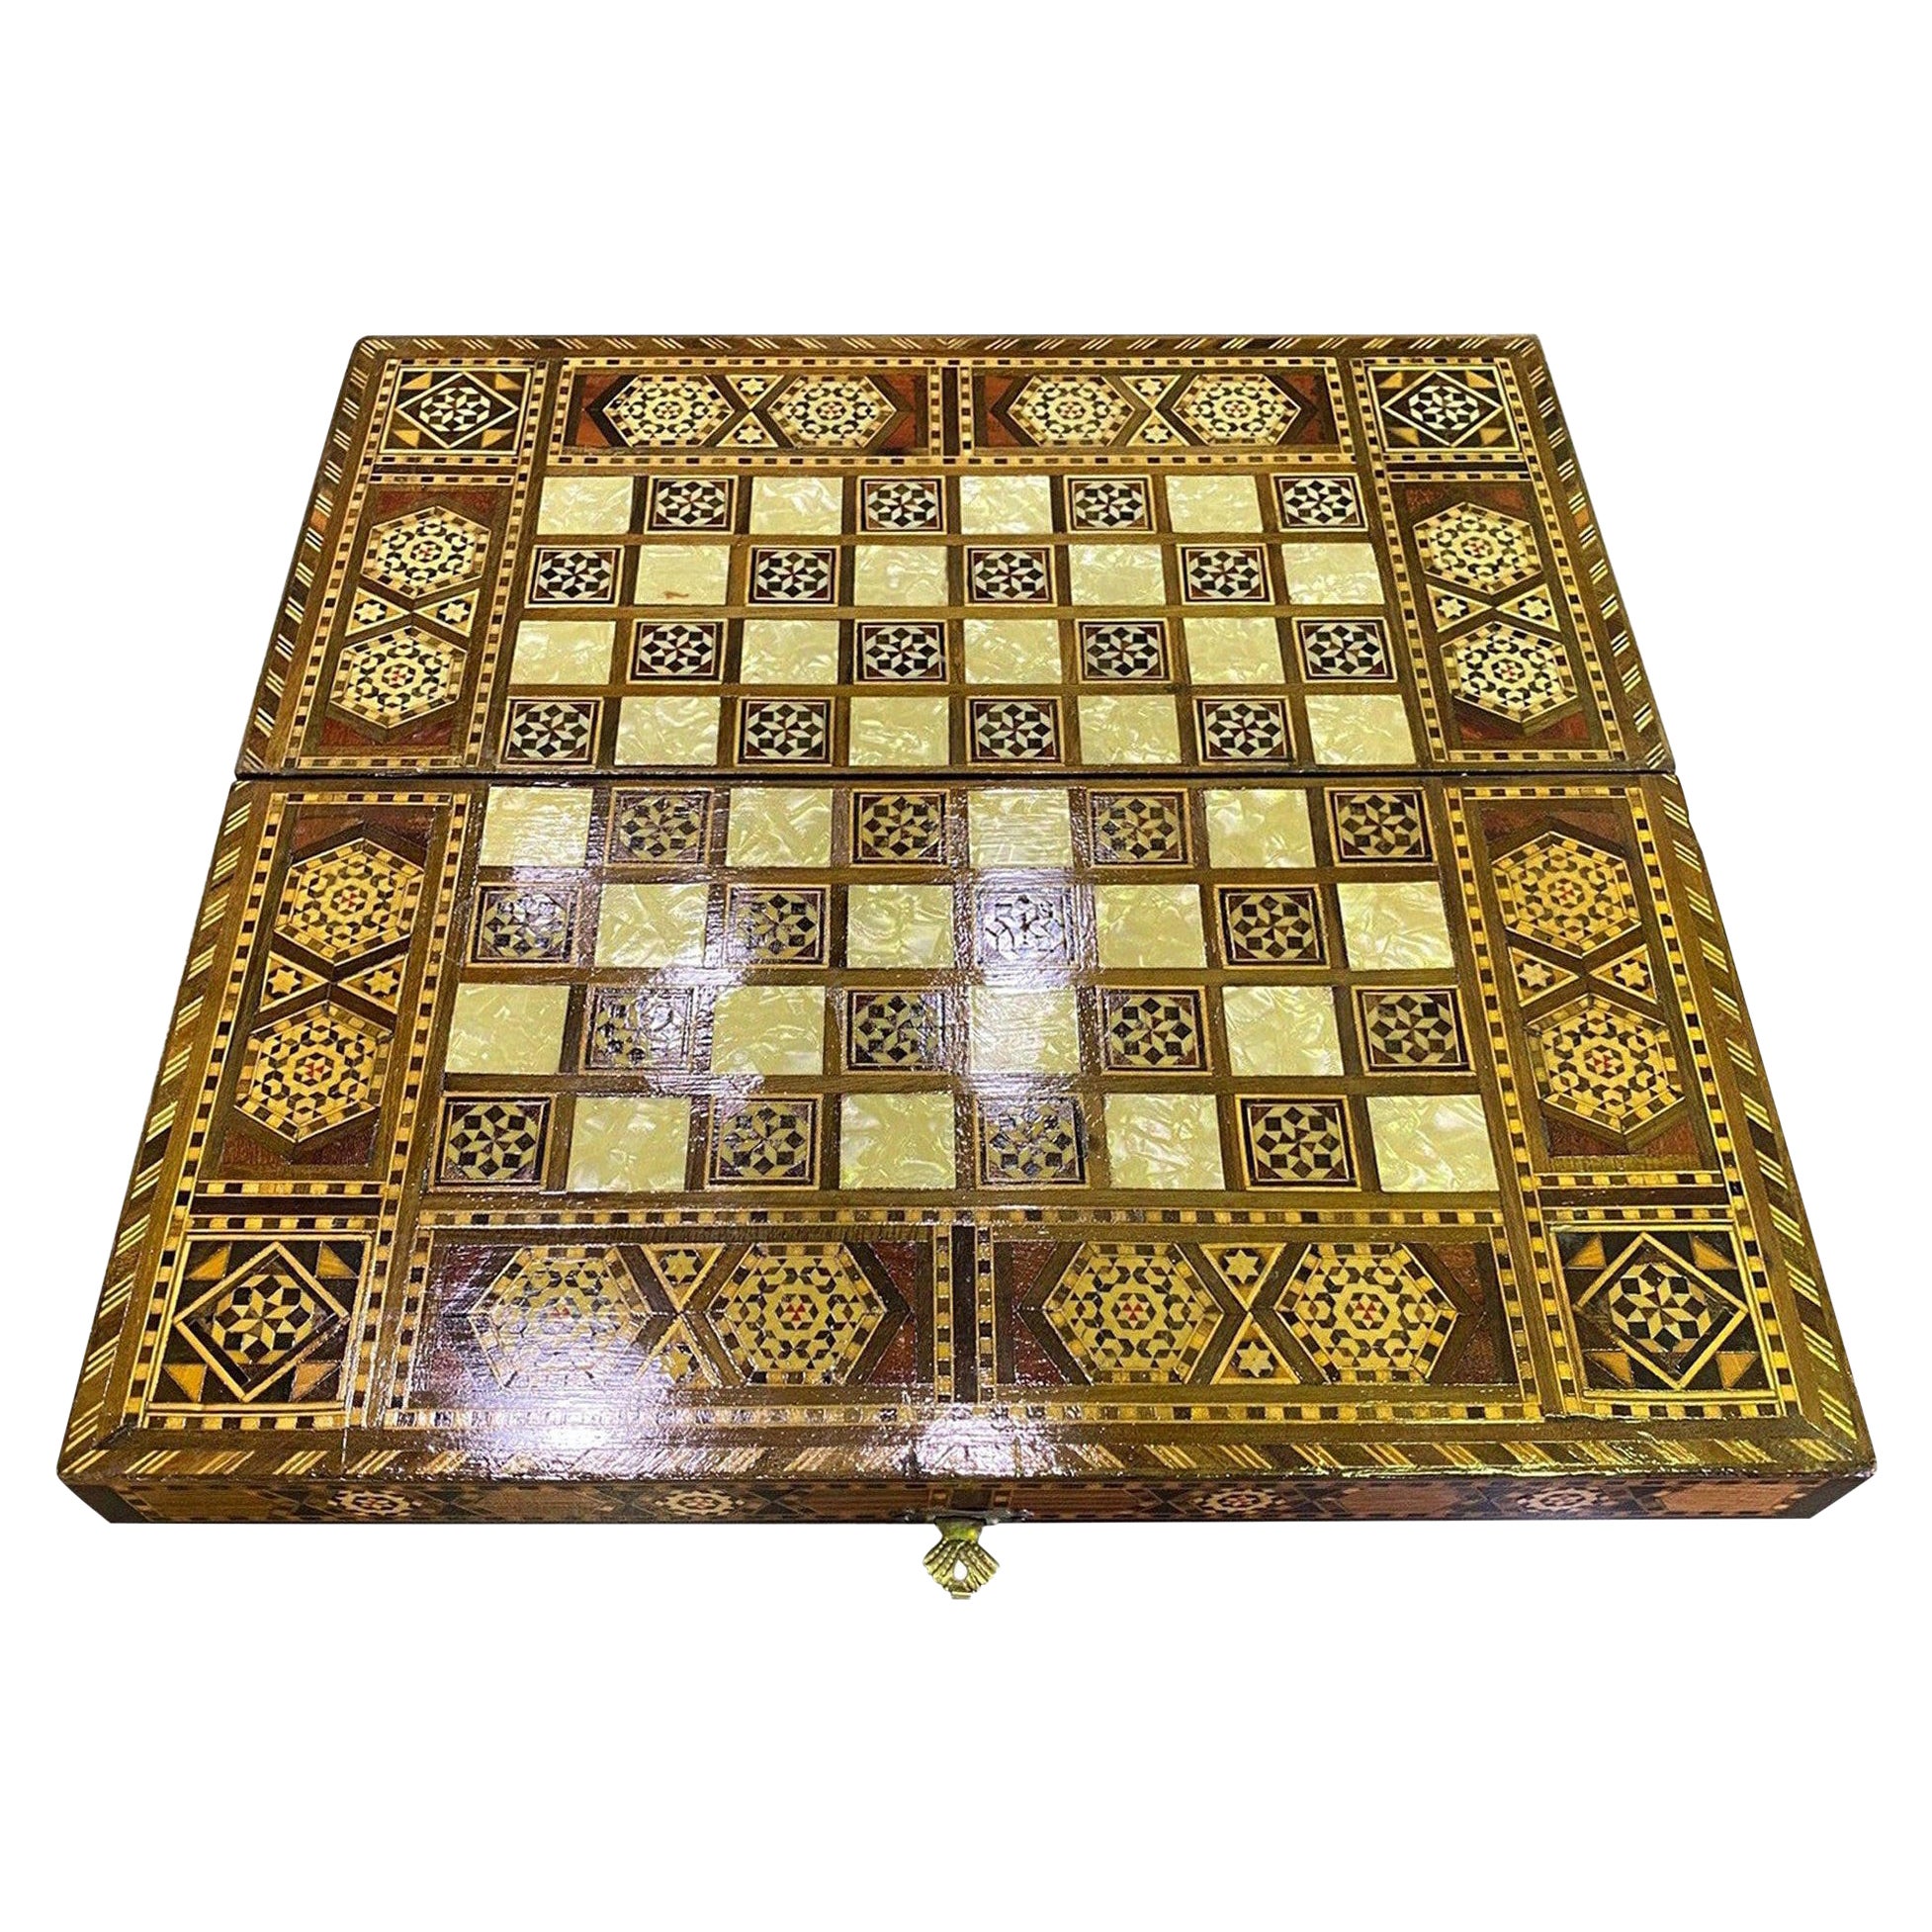 Syrian Moorish Inlaid Mosaic Backgammon and Chess Wooden Game Board Box For Sale